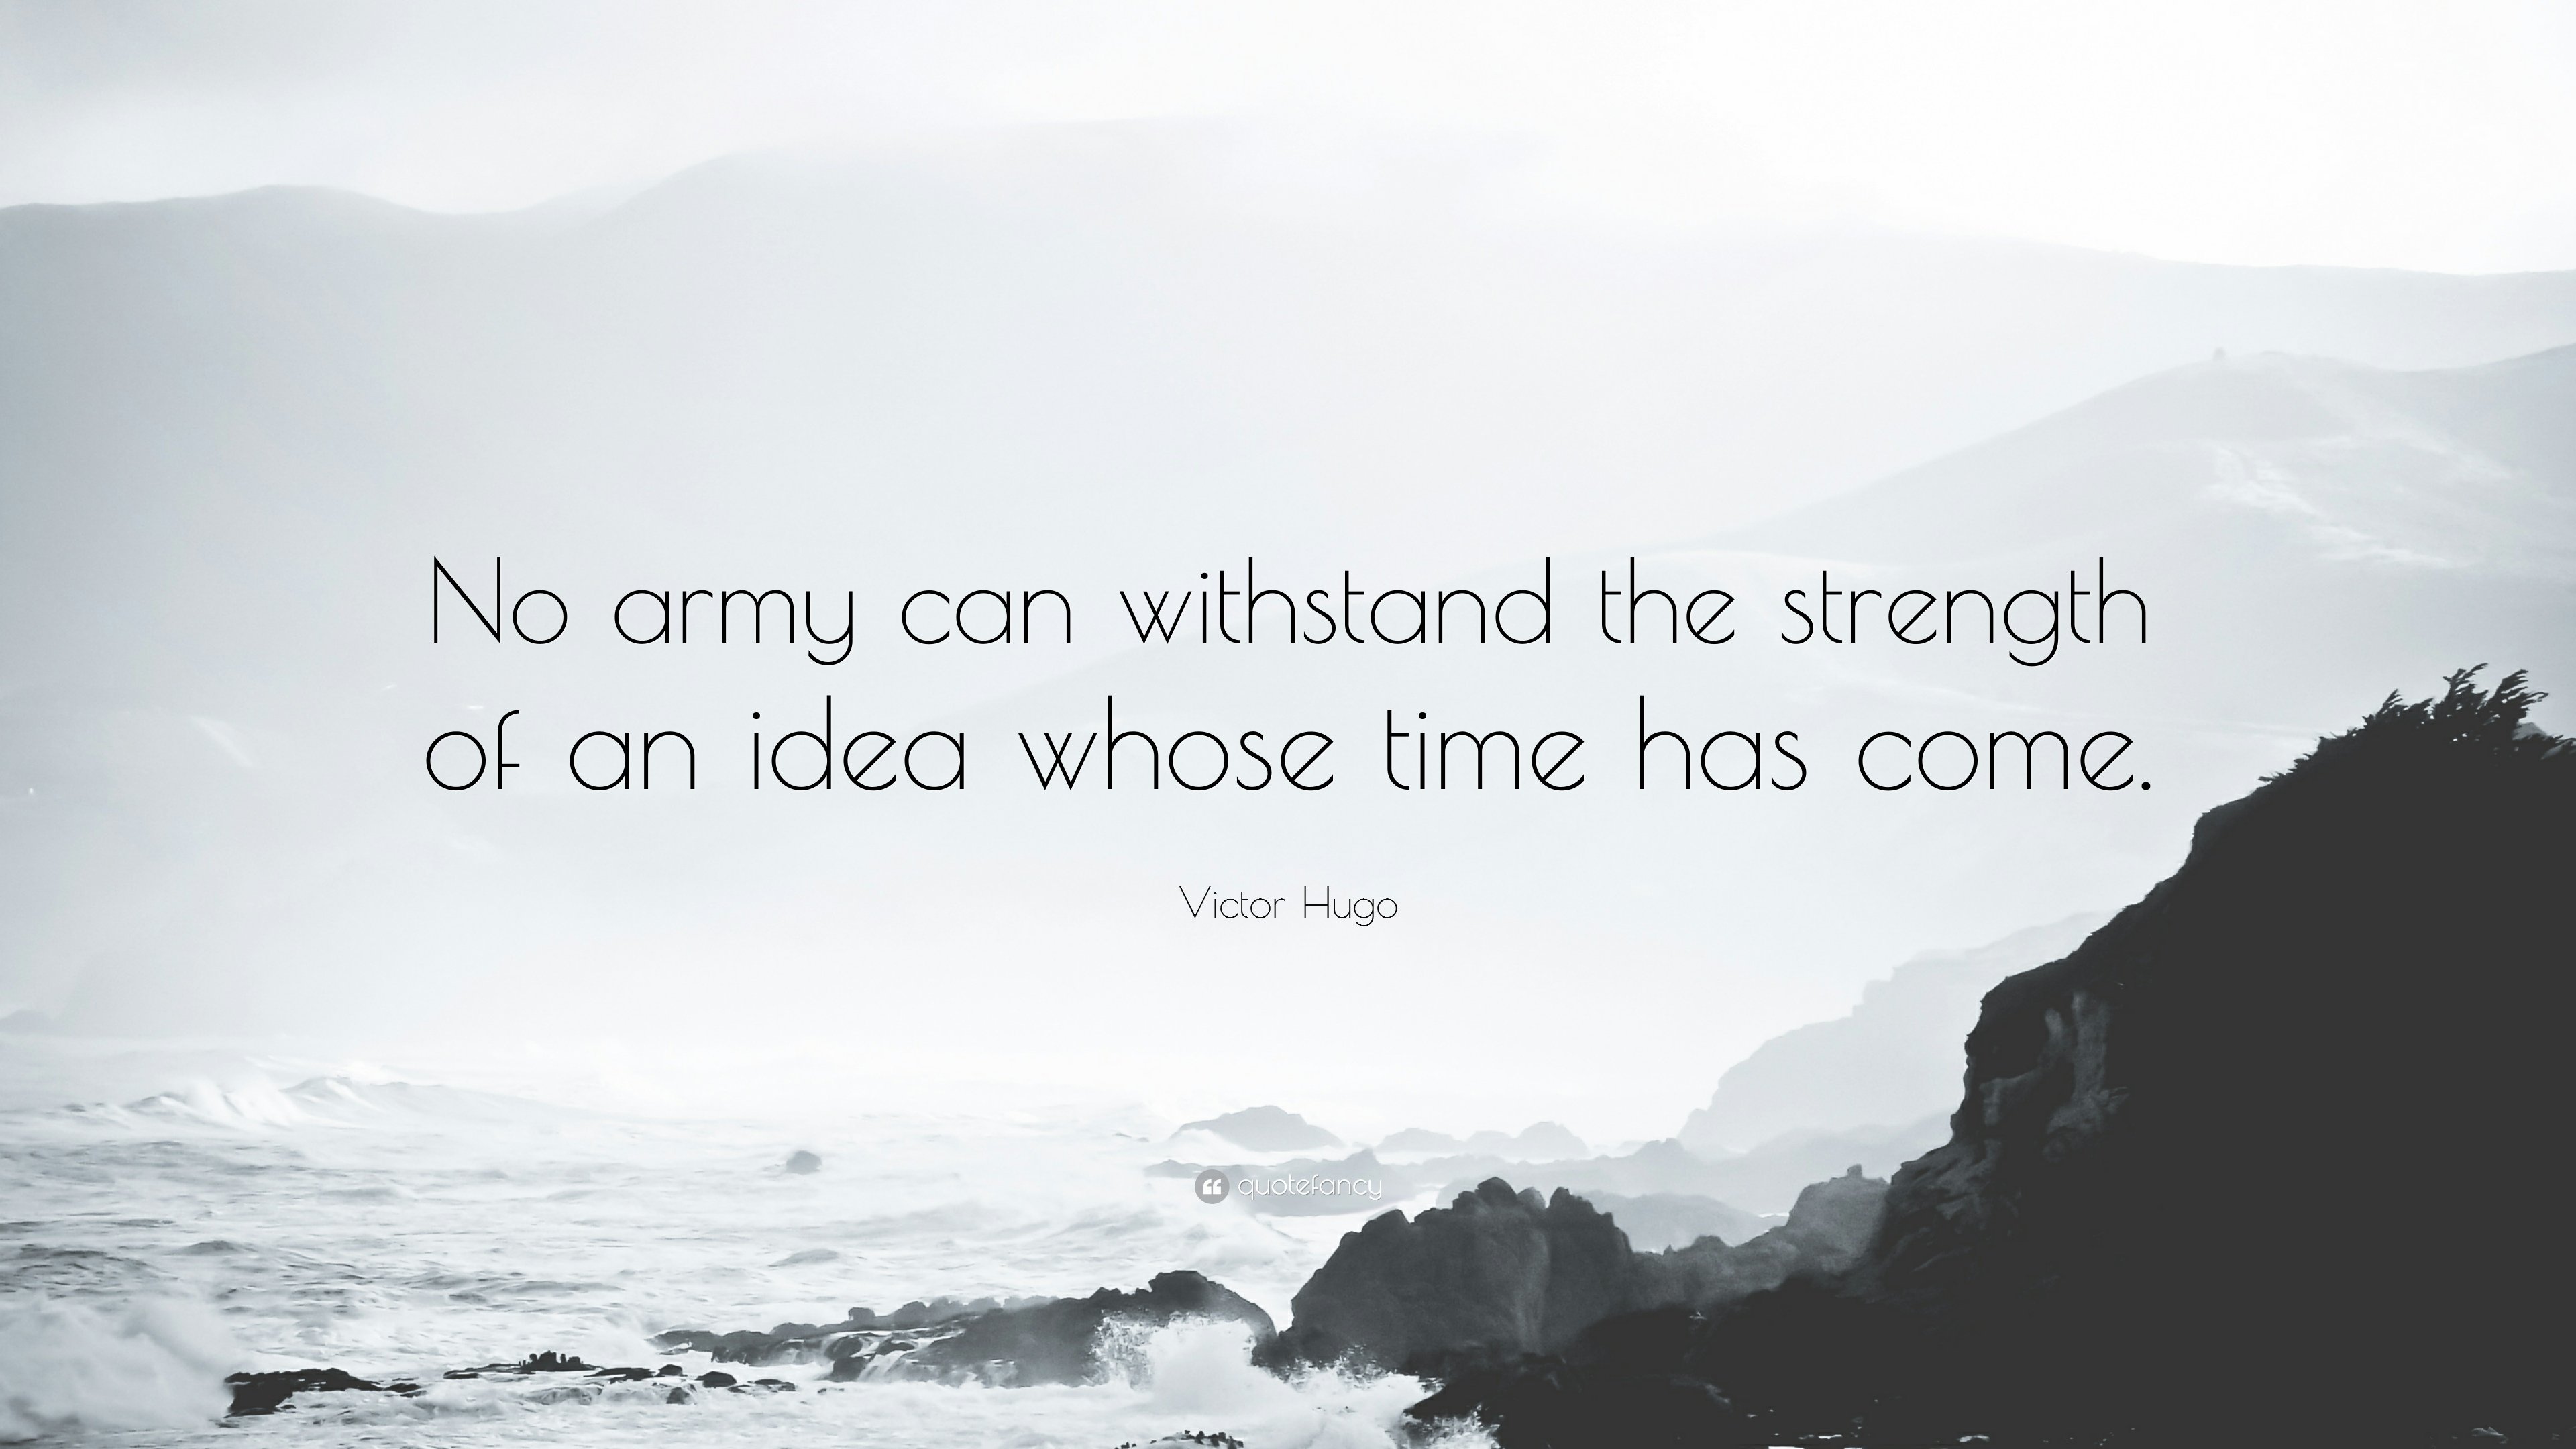 10 Wonderful An Idea Whose Time Has Come victor hugo quote no army can withstand the strength of an idea 4 2022